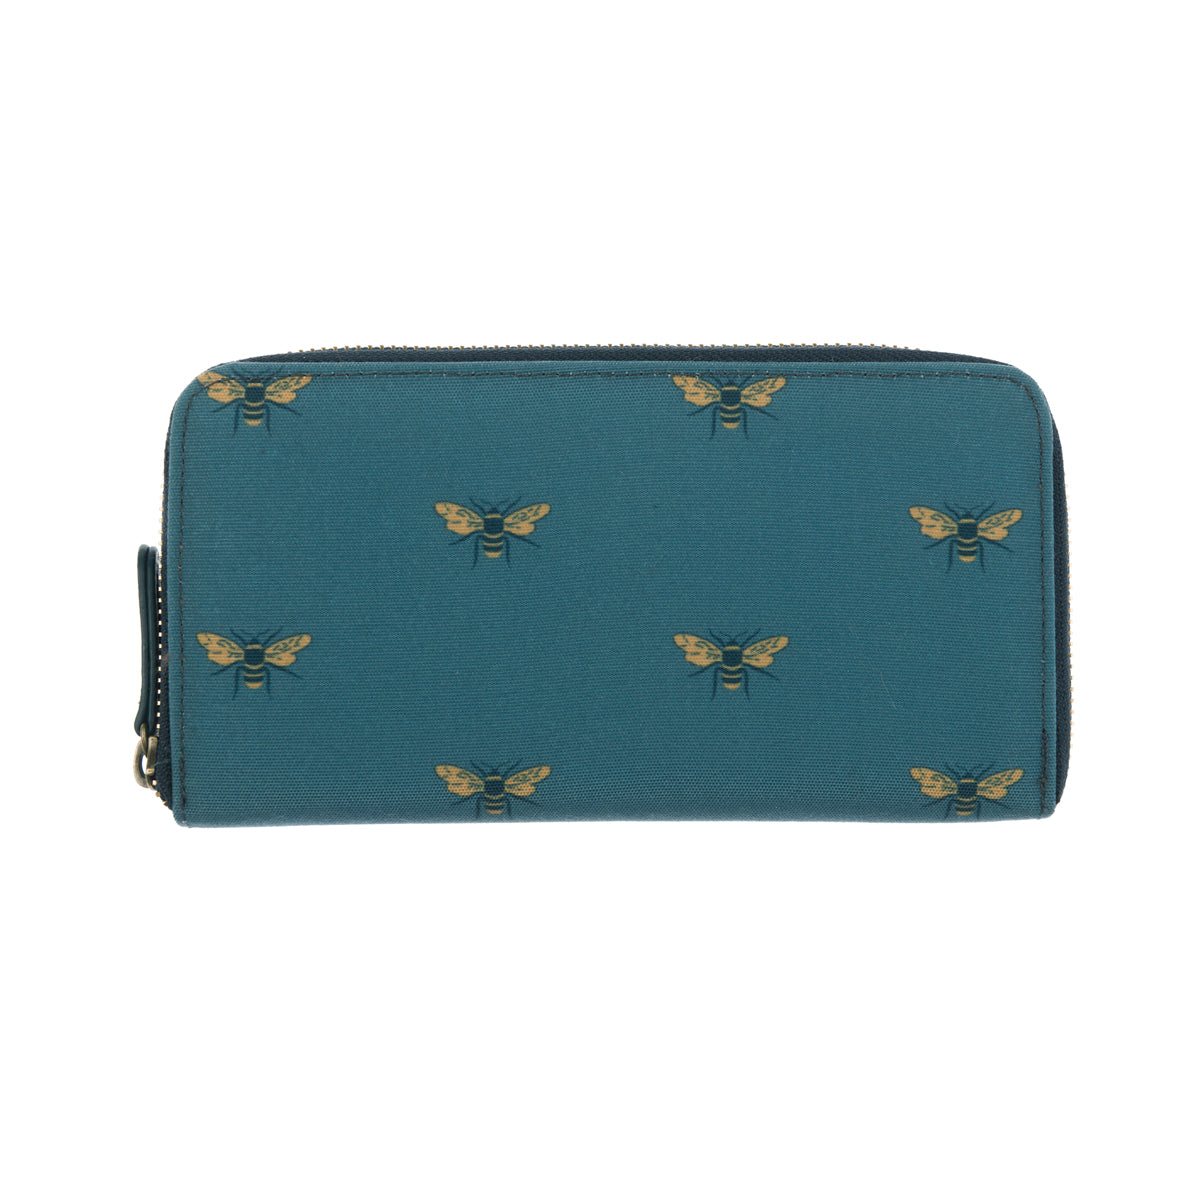 Bees Teal Wallet Purse by Sophie Allport